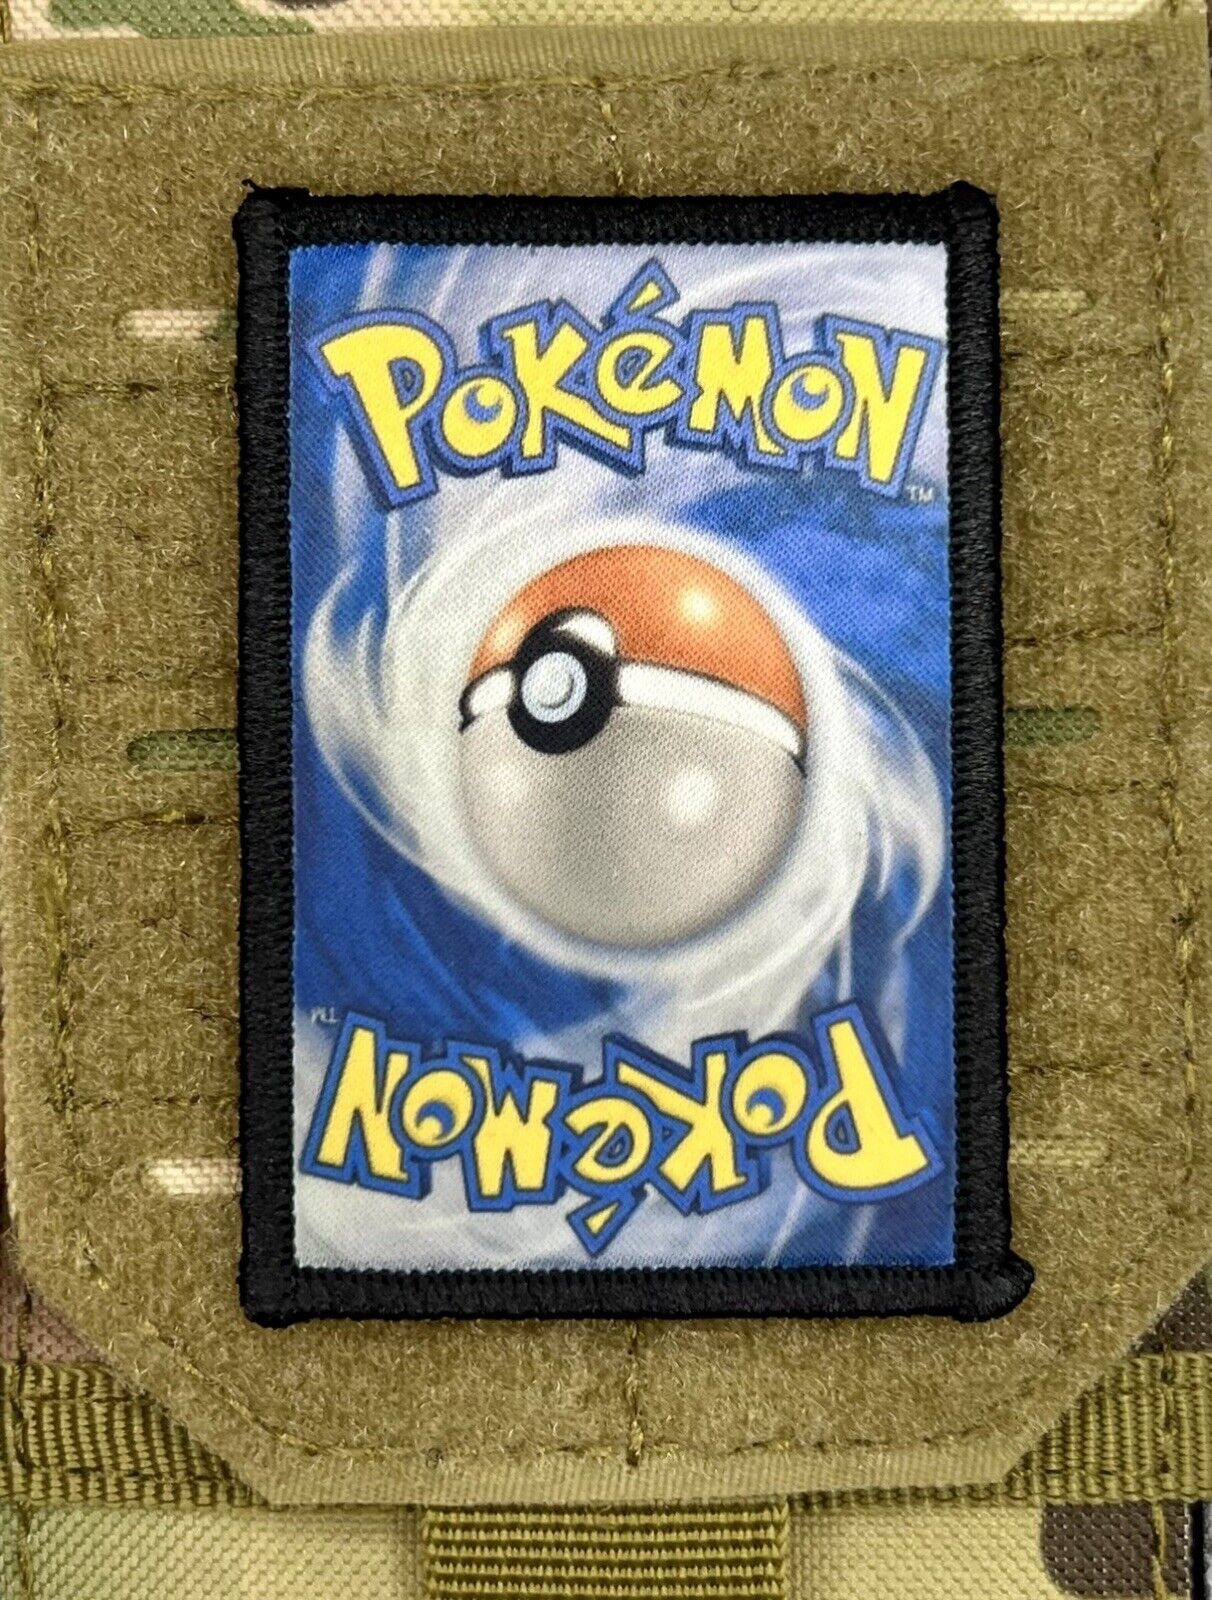 Pokemon Trading Card Morale Patch / Military ARMY Tactical Hook & Loop 336